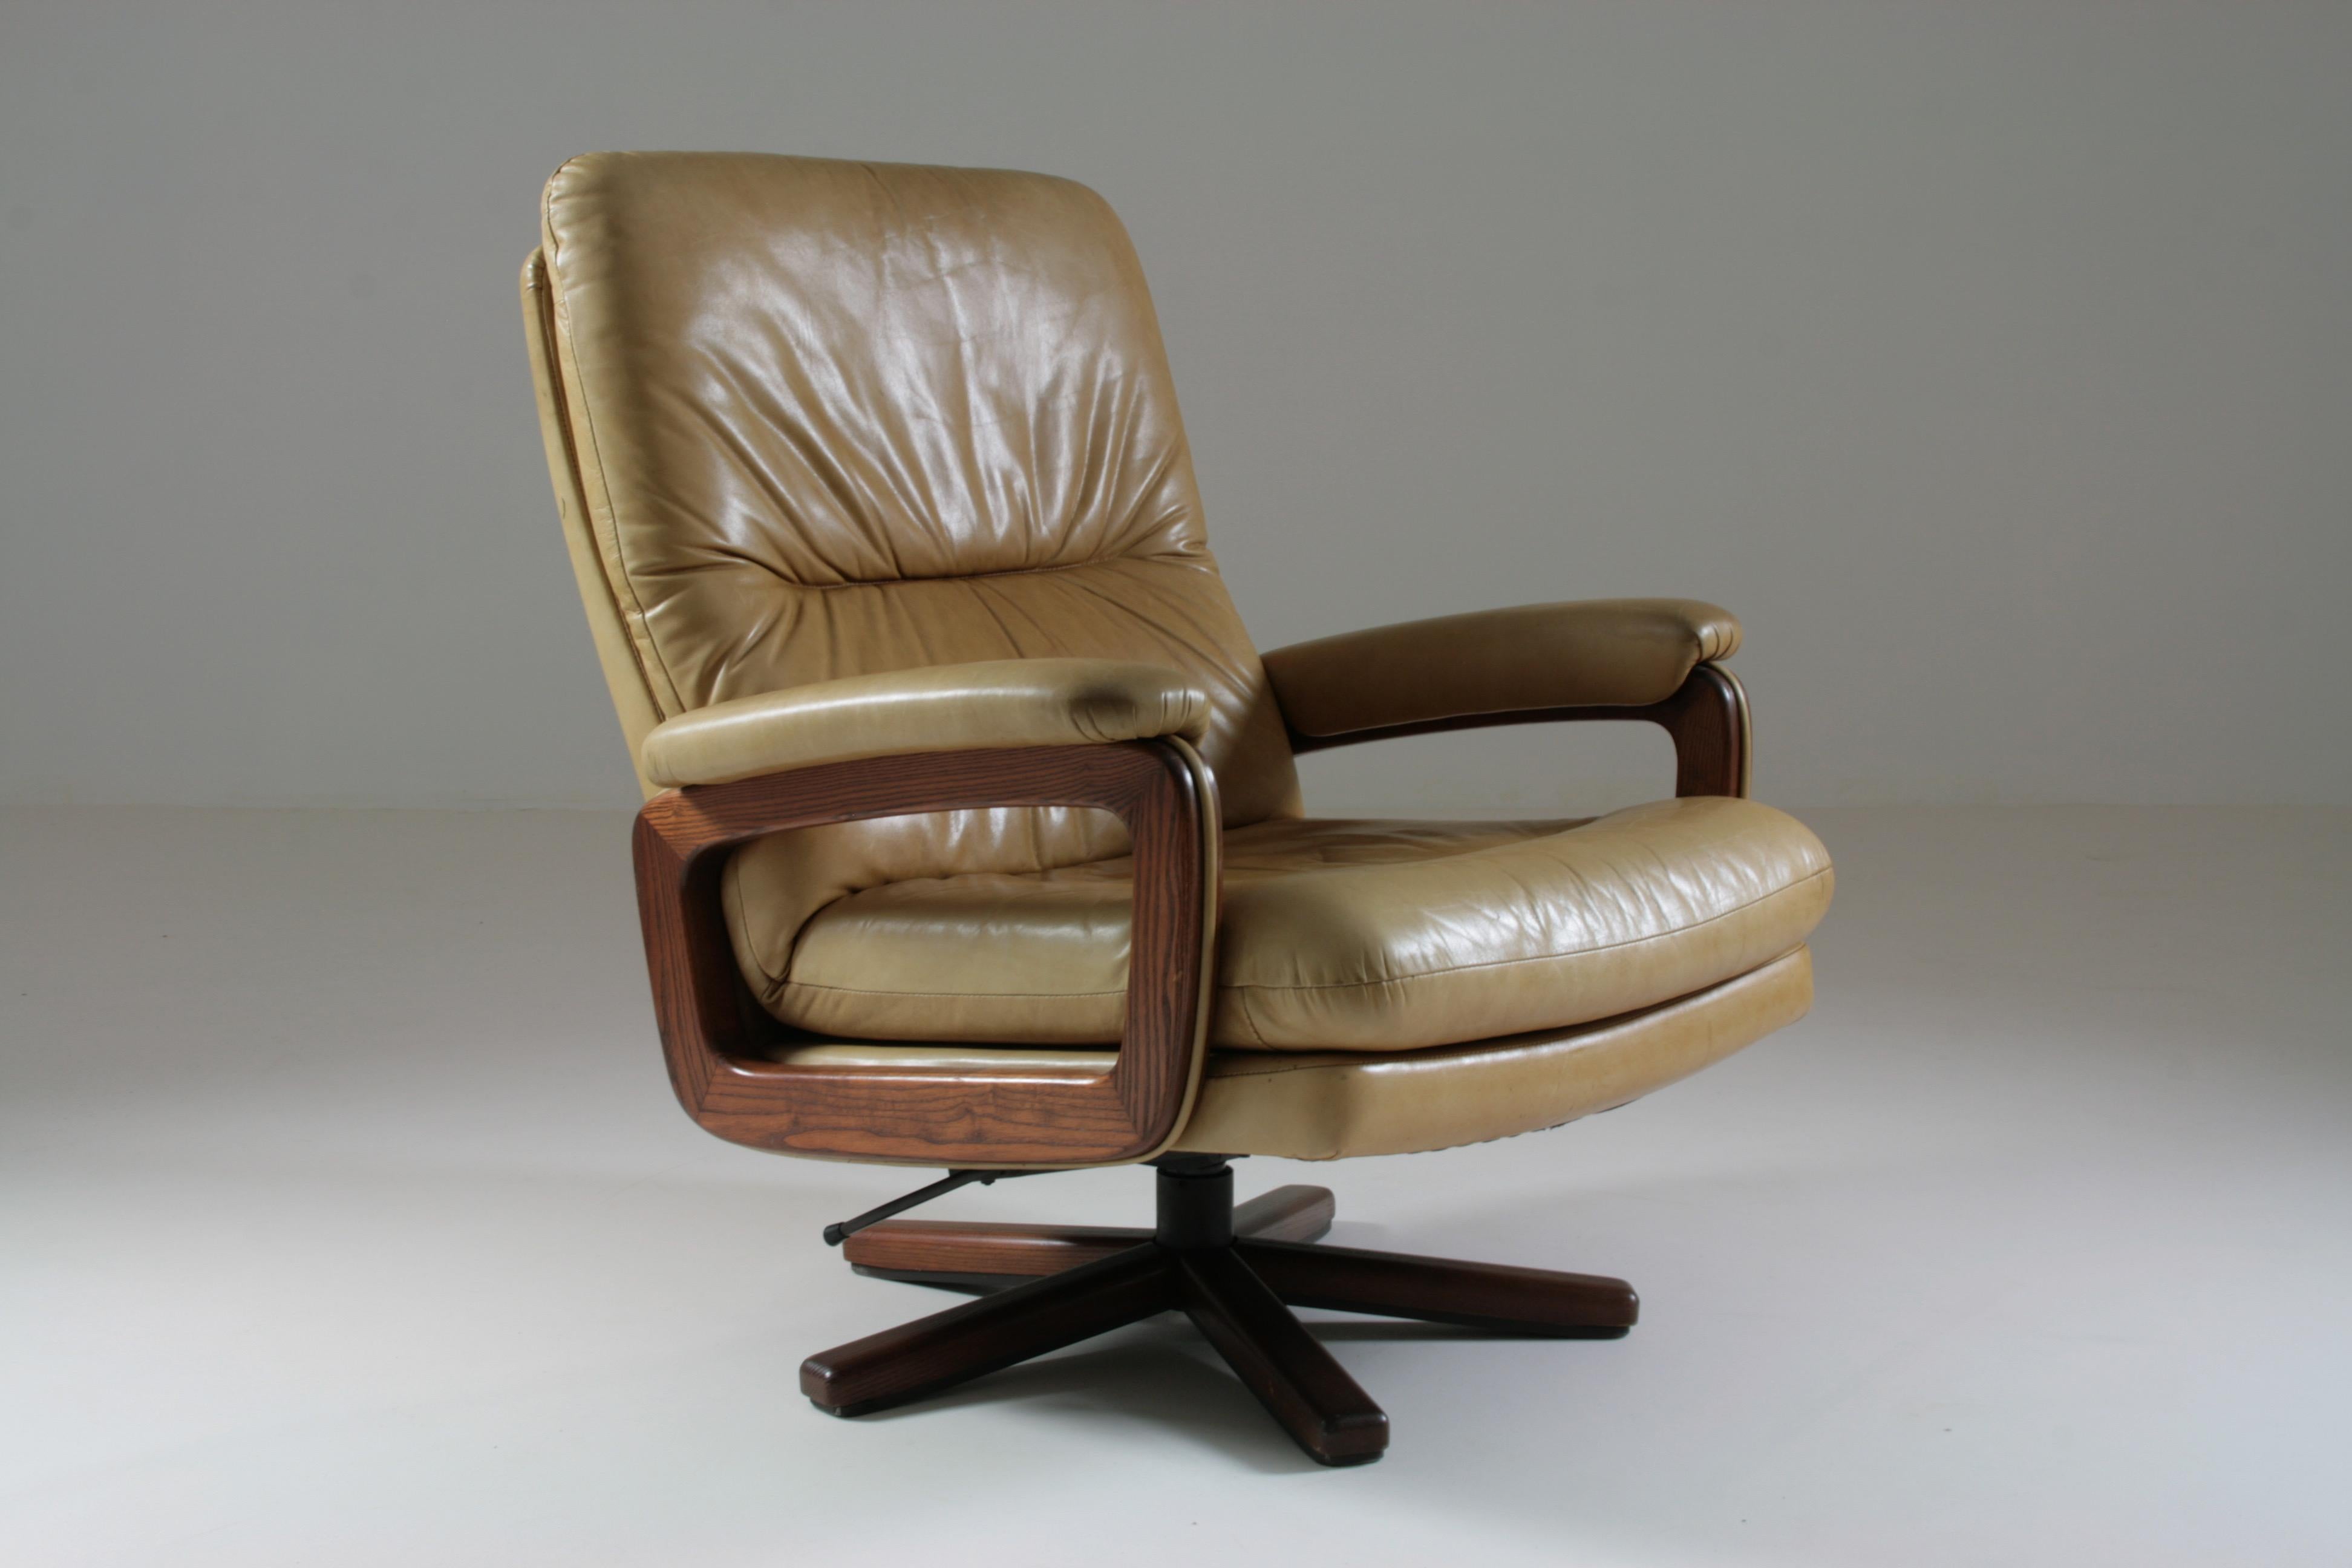 Swivel and reclining lounge chair designed by André Vandenbeuck, manufactured by Strässle in Switzerland. Central legs in metal and wood providing a perfect seat on the ground. Beige leather upholstery with a nice patina. Note a small tear on the